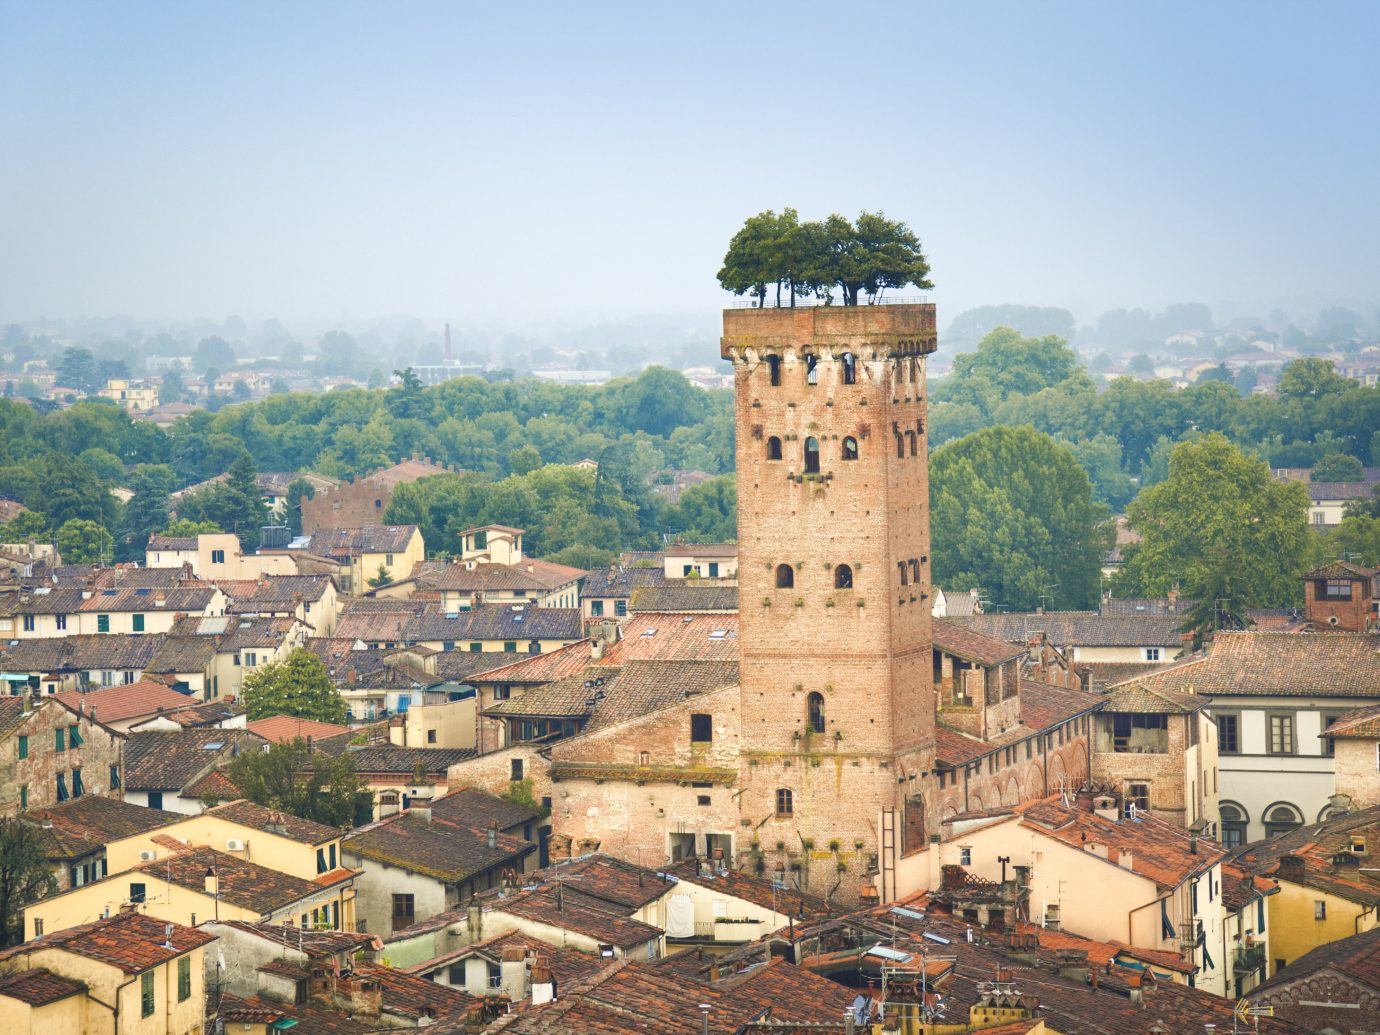 Italy Trip Ideas sky landmark City Town tower urban area tree historic site fortification building château castle ancient history Village history tourism roof middle ages